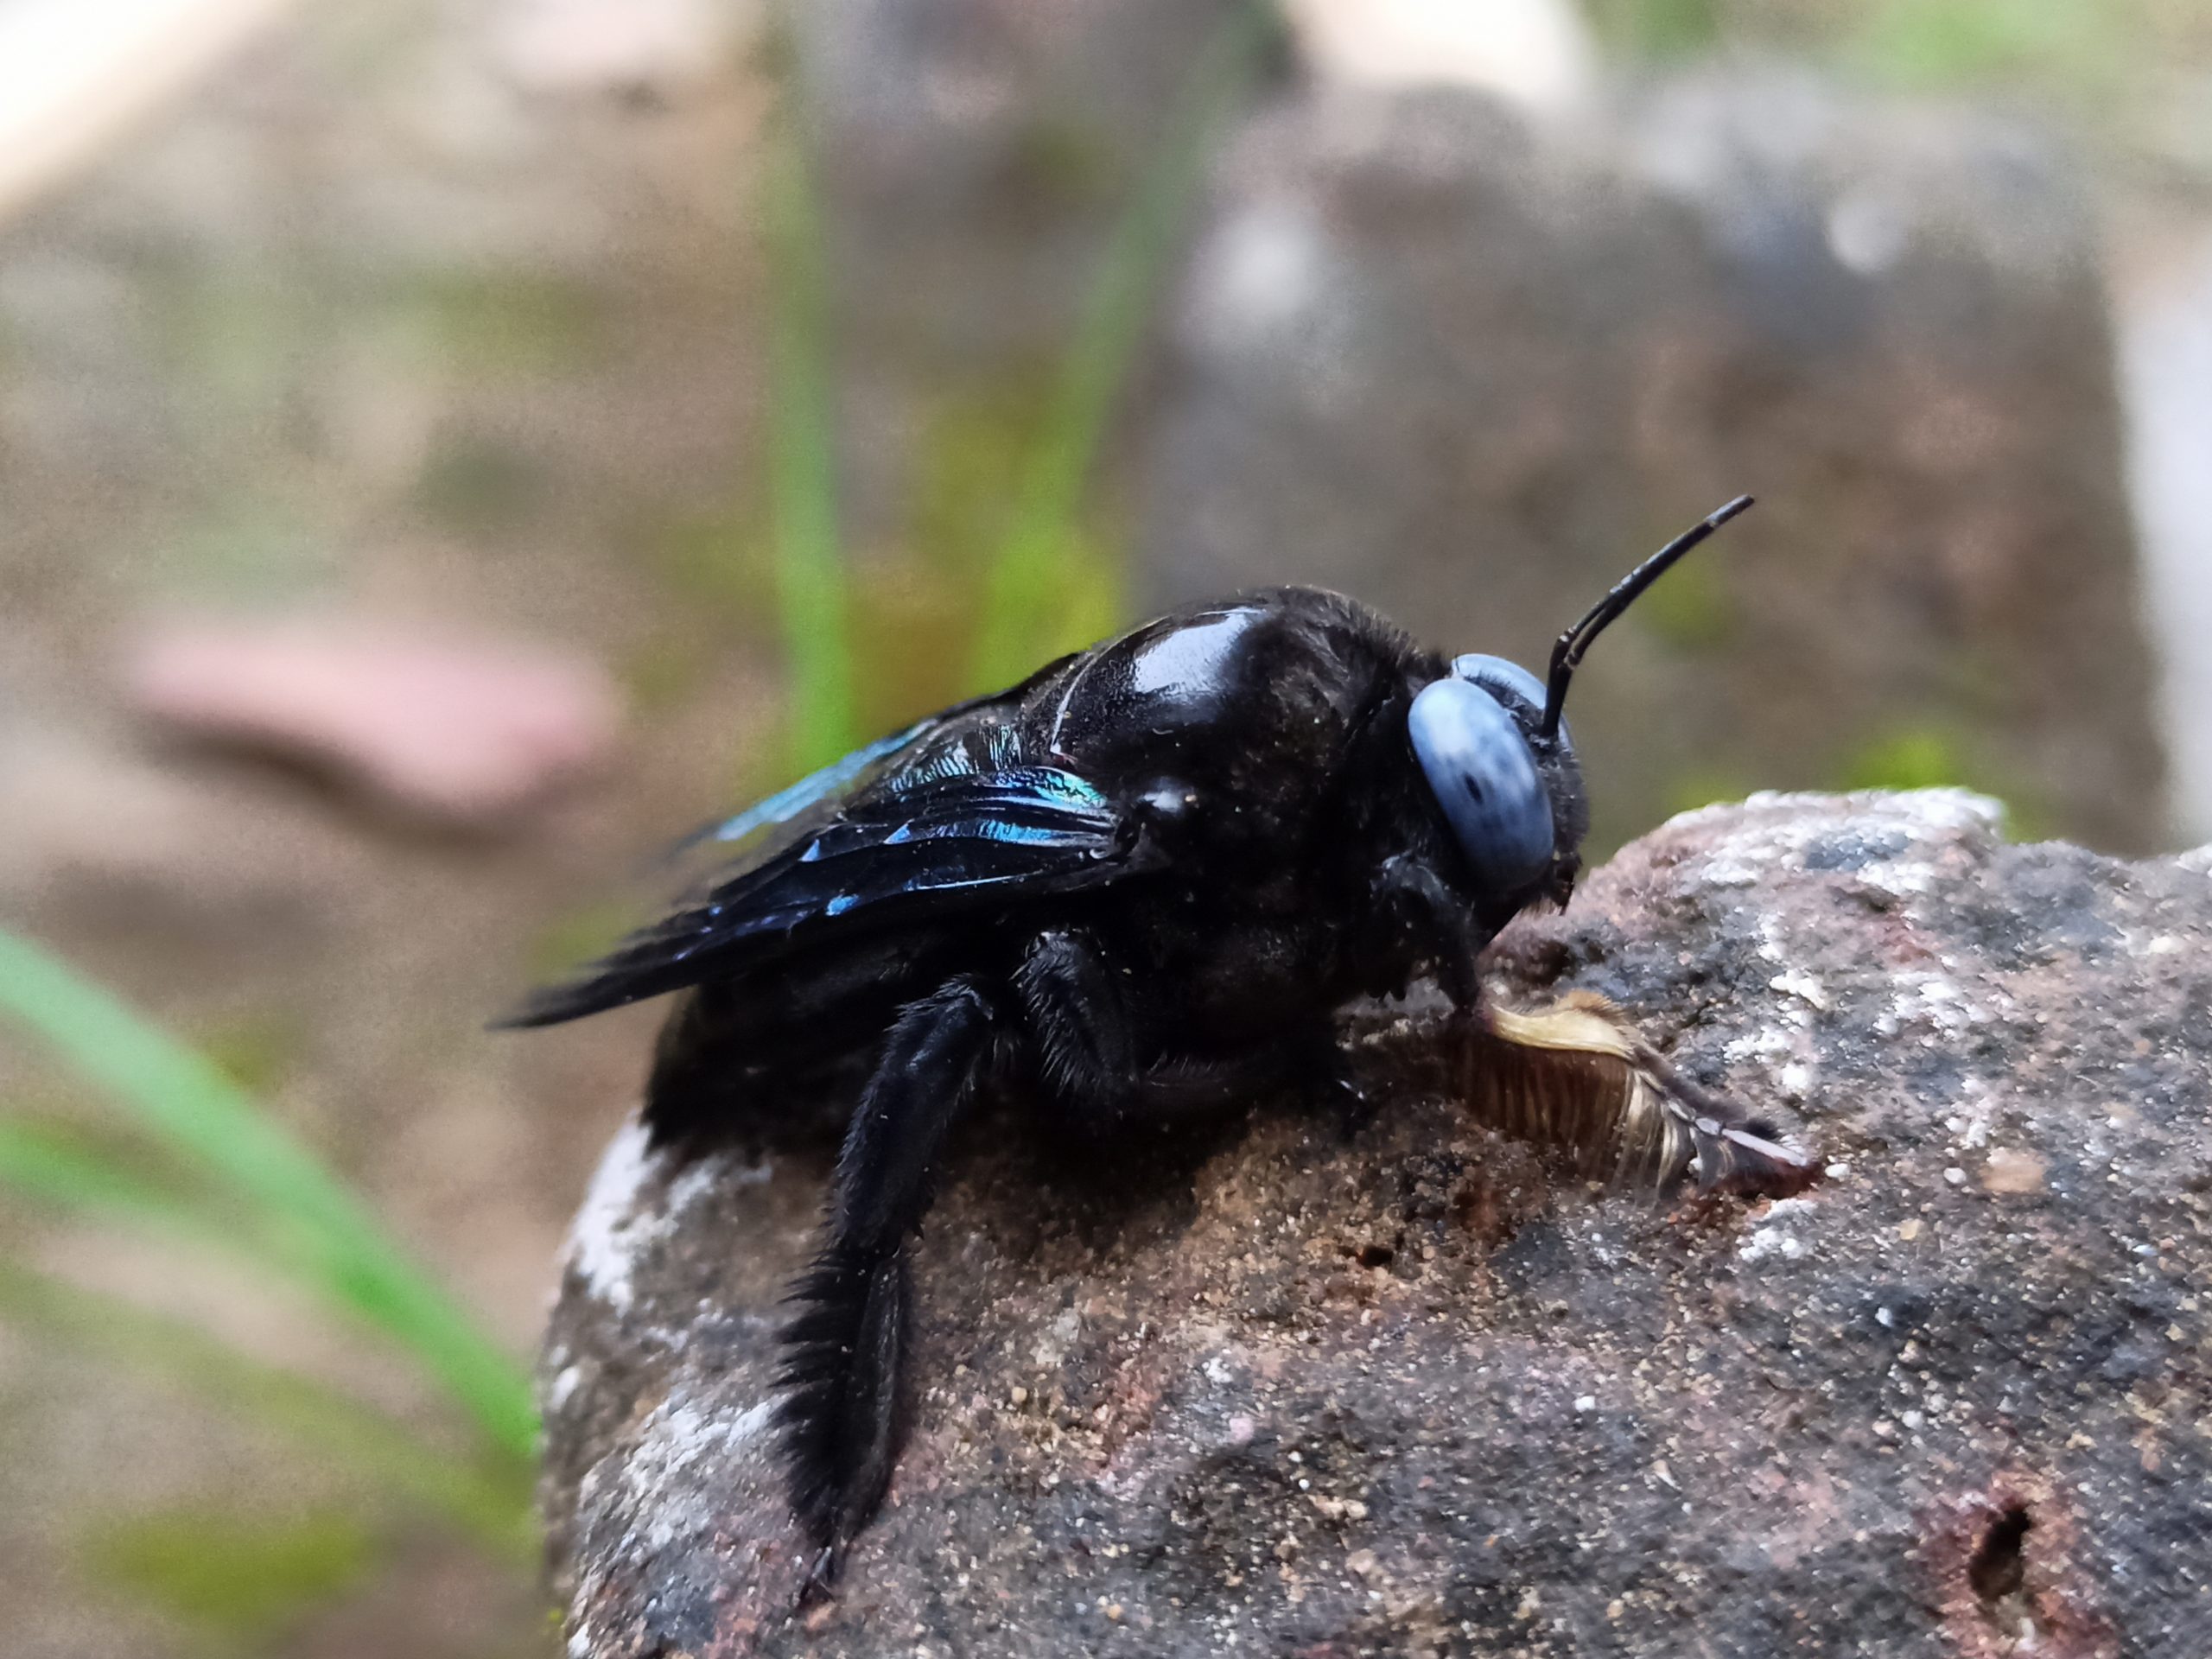 An insect on a rock